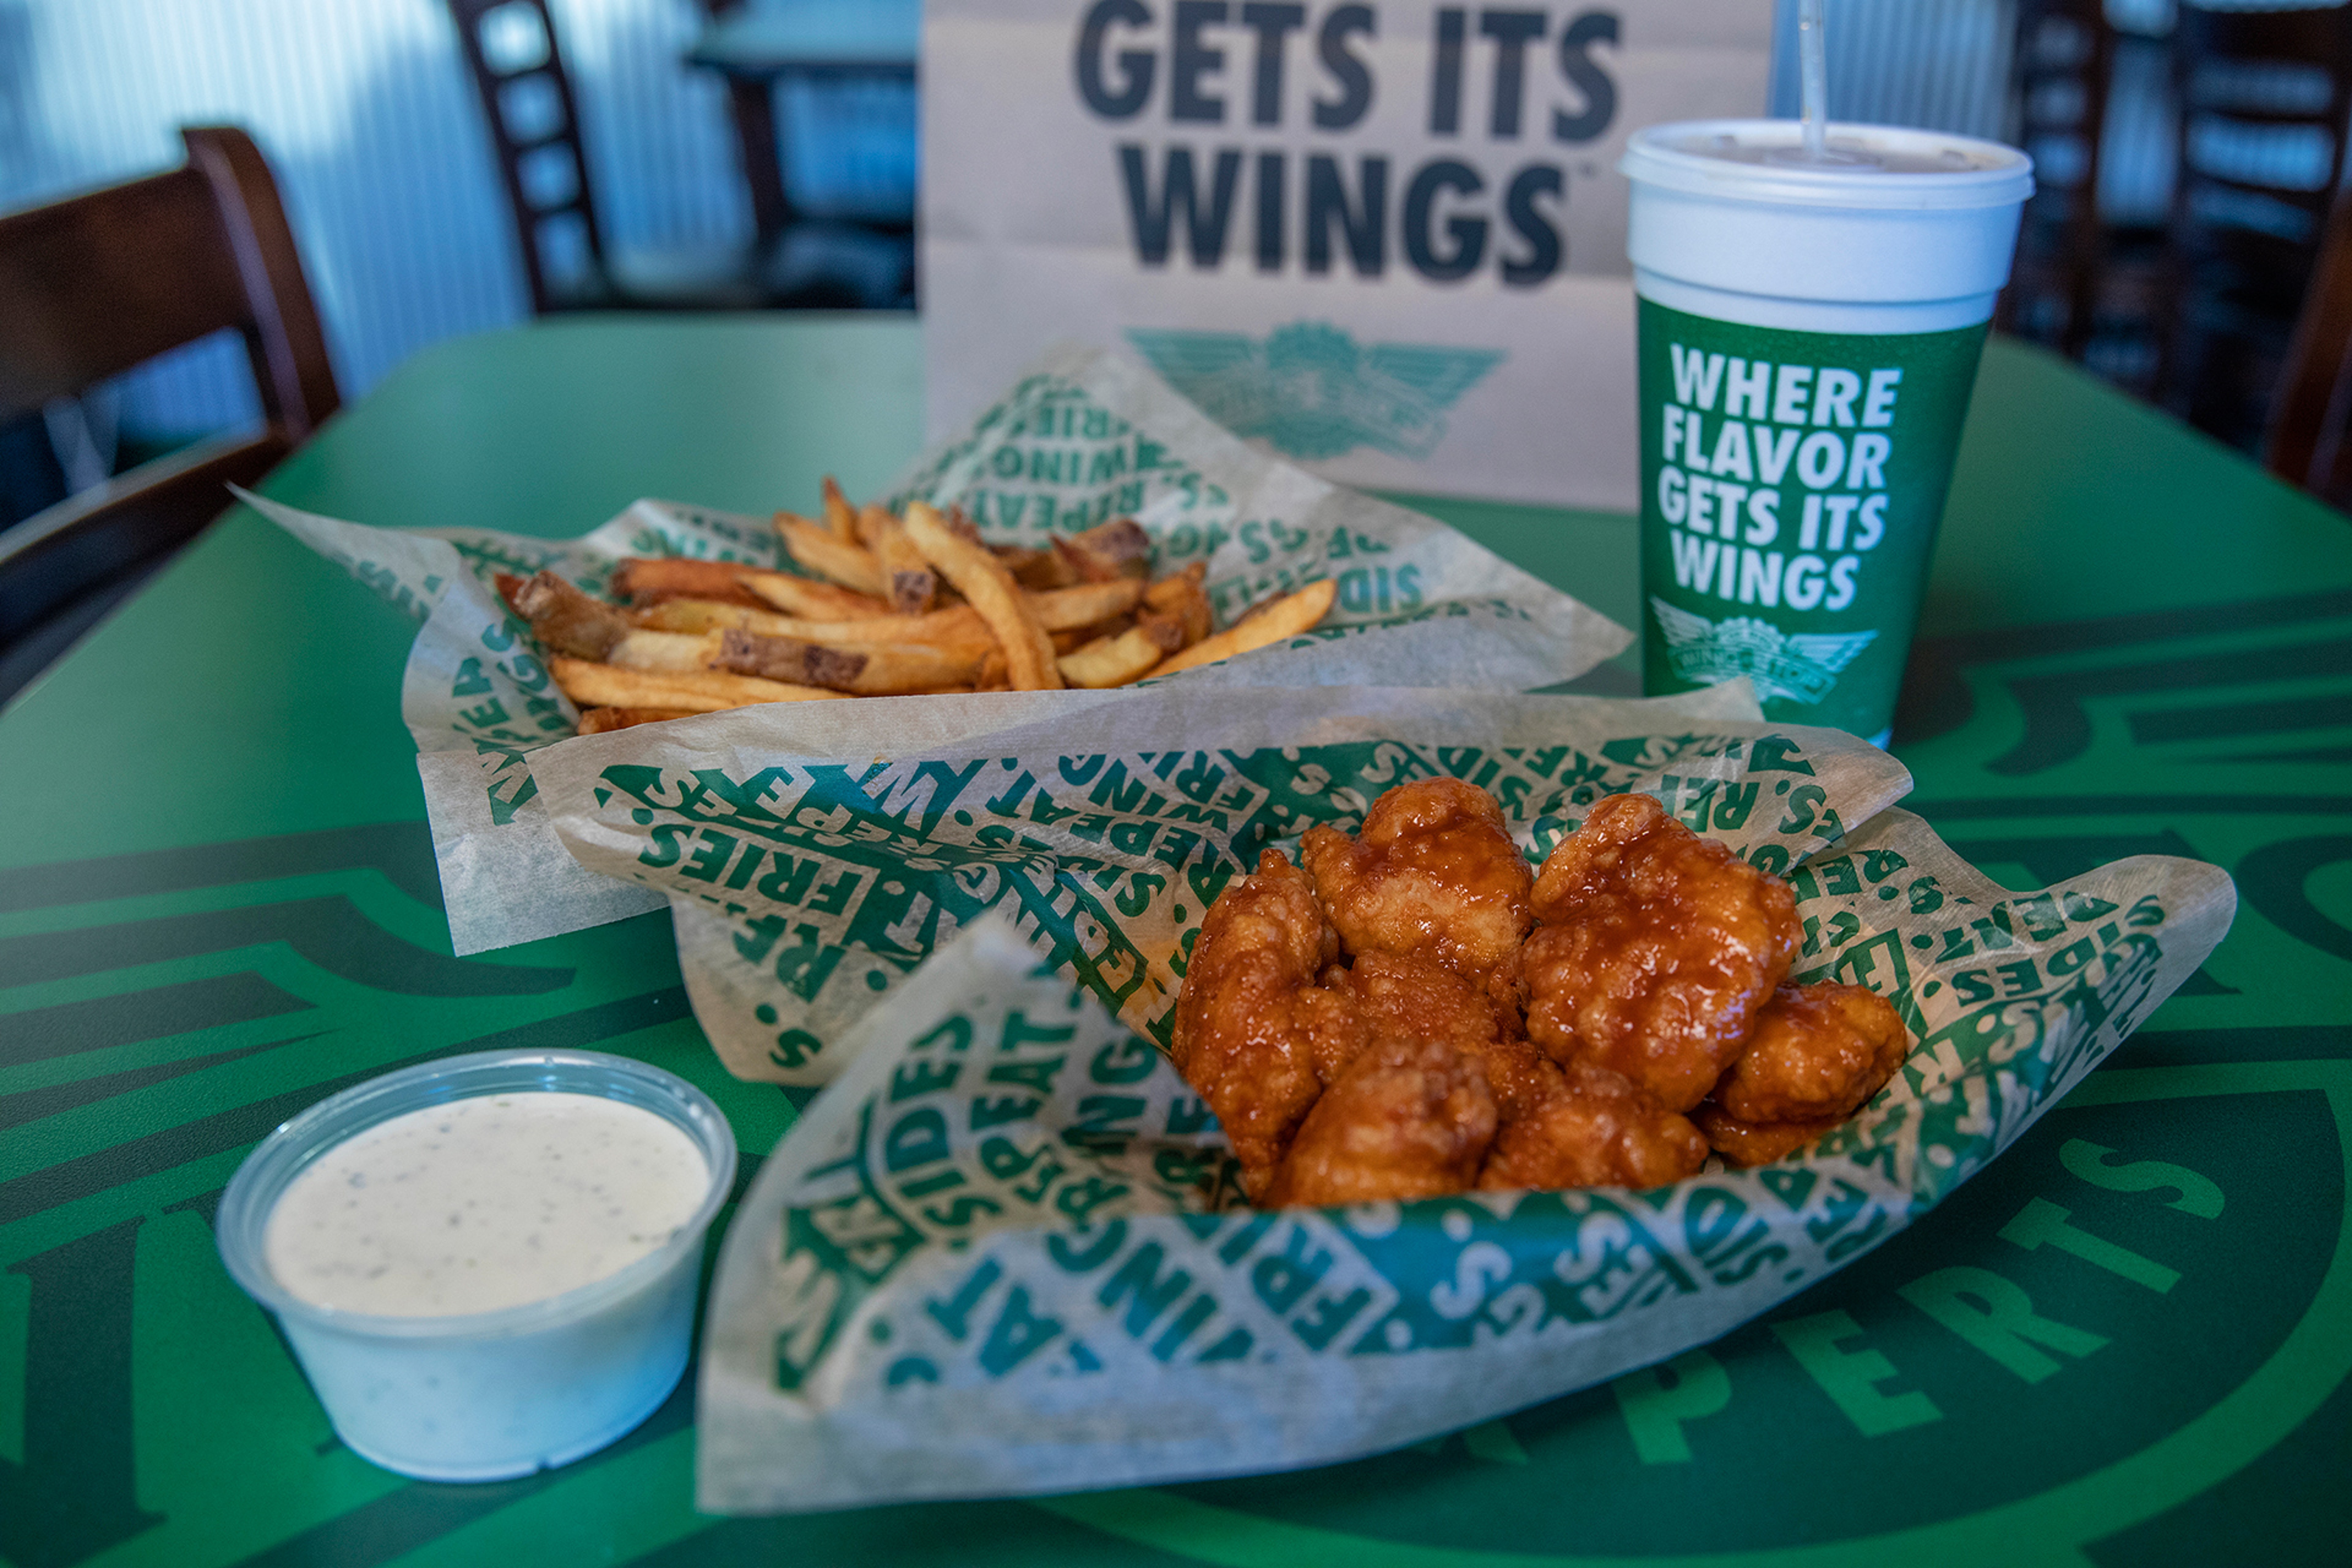 Why Wingstop Shares Are Sliding After Hours